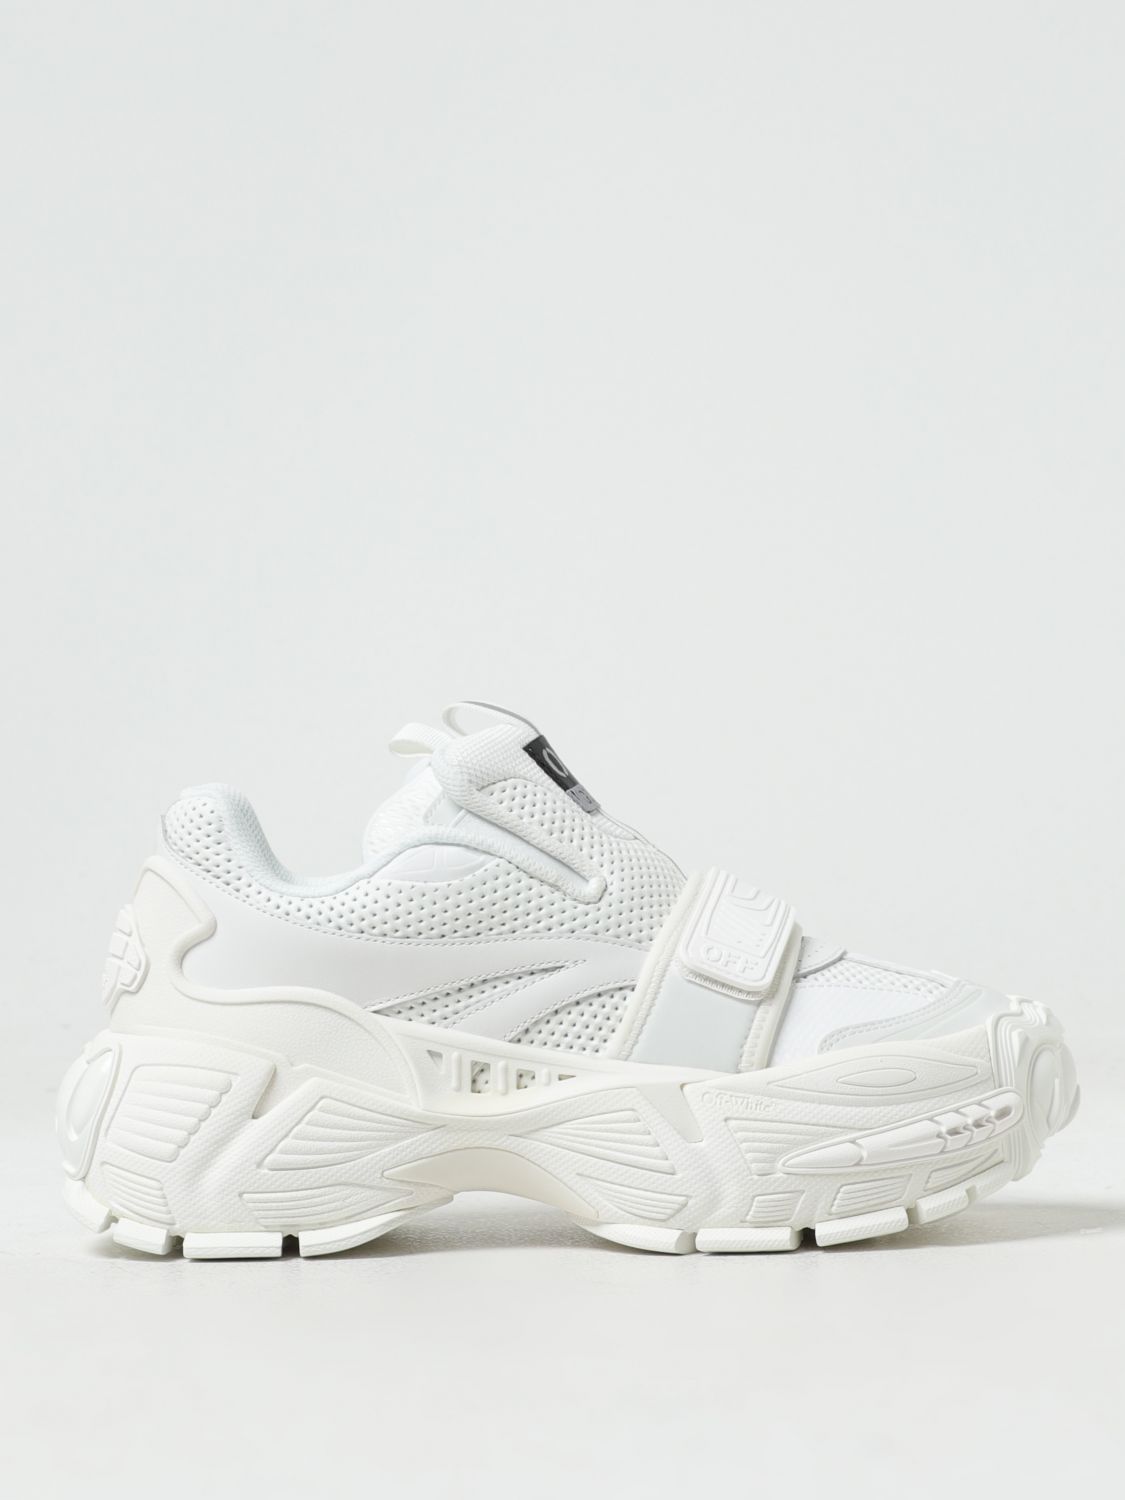 Nike x Off-White Shoes for Women - Vestiaire Collective